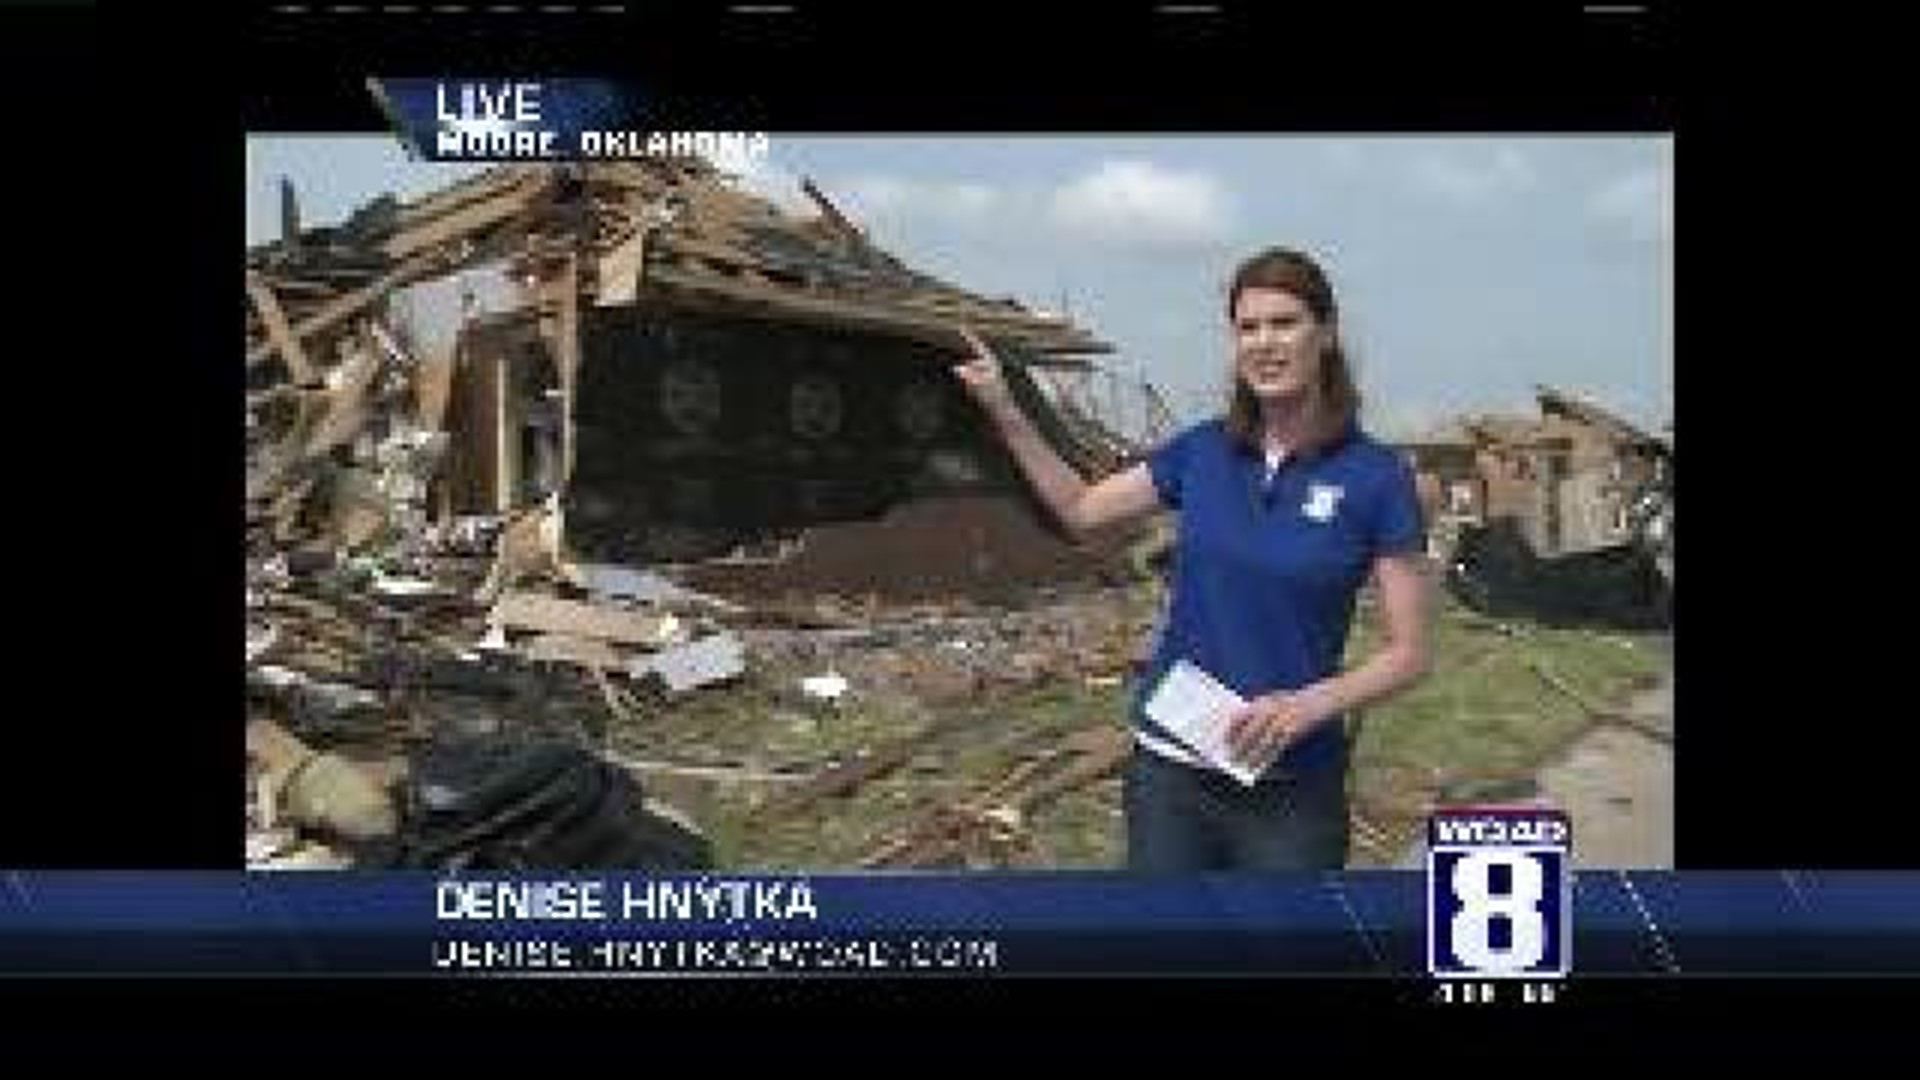 WQAD Shares Stories Out Of Moore, Oklahoma